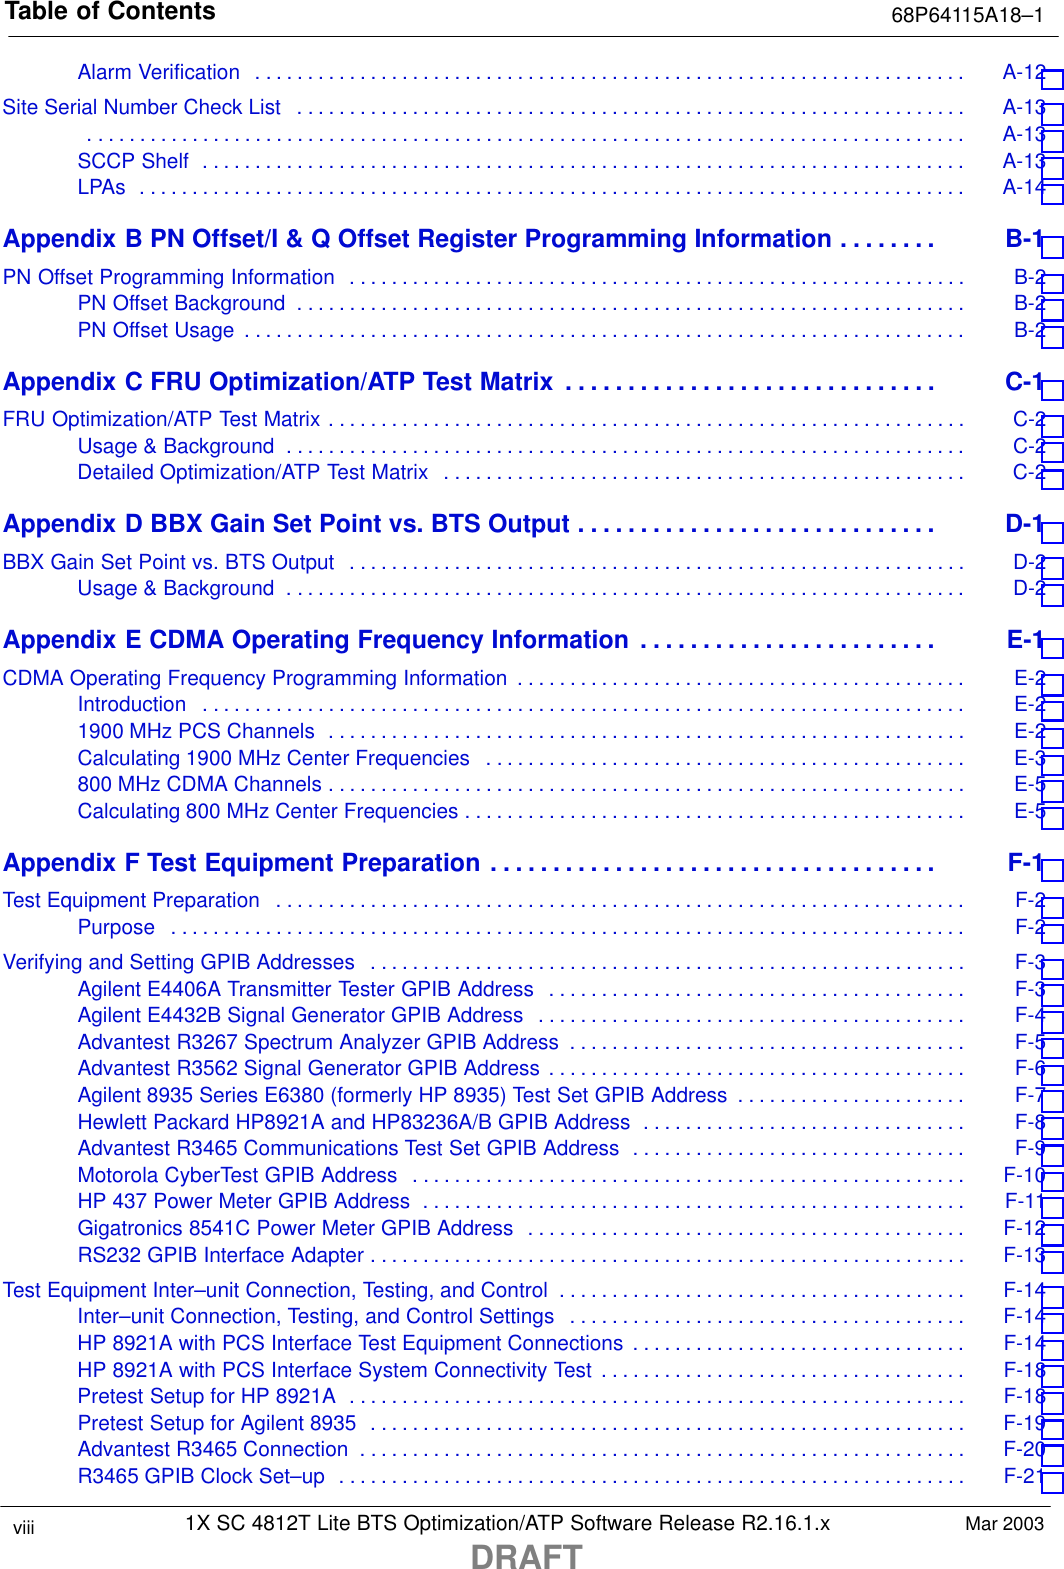 Table of Contents 68P64115A18–11X SC 4812T Lite BTS Optimization/ATP Software Release R2.16.1.xDRAFTviii Mar 2003Alarm Verification A-12 . . . . . . . . . . . . . . . . . . . . . . . . . . . . . . . . . . . . . . . . . . . . . . . . . . . . . . . . . . . . . . . . . . . . Site Serial Number Check List A-13 . . . . . . . . . . . . . . . . . . . . . . . . . . . . . . . . . . . . . . . . . . . . . . . . . . . . . . . . . . . . . . . . A-13 . . . . . . . . . . . . . . . . . . . . . . . . . . . . . . . . . . . . . . . . . . . . . . . . . . . . . . . . . . . . . . . . . . . . . . . . . . . . . . . . . . . . SCCP Shelf A-13 . . . . . . . . . . . . . . . . . . . . . . . . . . . . . . . . . . . . . . . . . . . . . . . . . . . . . . . . . . . . . . . . . . . . . . . . . LPAs A-14 . . . . . . . . . . . . . . . . . . . . . . . . . . . . . . . . . . . . . . . . . . . . . . . . . . . . . . . . . . . . . . . . . . . . . . . . . . . . . . . Appendix B PN Offset/I &amp; Q Offset Register Programming Information B-1 . . . . . . . . PN Offset Programming Information B-2 . . . . . . . . . . . . . . . . . . . . . . . . . . . . . . . . . . . . . . . . . . . . . . . . . . . . . . . . . . . PN Offset Background B-2 . . . . . . . . . . . . . . . . . . . . . . . . . . . . . . . . . . . . . . . . . . . . . . . . . . . . . . . . . . . . . . . . PN Offset Usage B-2 . . . . . . . . . . . . . . . . . . . . . . . . . . . . . . . . . . . . . . . . . . . . . . . . . . . . . . . . . . . . . . . . . . . . . Appendix C FRU Optimization/ATP Test Matrix C-1 . . . . . . . . . . . . . . . . . . . . . . . . . . . . . . FRU Optimization/ATP Test Matrix C-2 . . . . . . . . . . . . . . . . . . . . . . . . . . . . . . . . . . . . . . . . . . . . . . . . . . . . . . . . . . . . . Usage &amp; Background C-2 . . . . . . . . . . . . . . . . . . . . . . . . . . . . . . . . . . . . . . . . . . . . . . . . . . . . . . . . . . . . . . . . . Detailed Optimization/ATP Test Matrix C-2 . . . . . . . . . . . . . . . . . . . . . . . . . . . . . . . . . . . . . . . . . . . . . . . . . . Appendix D BBX Gain Set Point vs. BTS Output D-1 . . . . . . . . . . . . . . . . . . . . . . . . . . . . . BBX Gain Set Point vs. BTS Output D-2 . . . . . . . . . . . . . . . . . . . . . . . . . . . . . . . . . . . . . . . . . . . . . . . . . . . . . . . . . . . Usage &amp; Background D-2 . . . . . . . . . . . . . . . . . . . . . . . . . . . . . . . . . . . . . . . . . . . . . . . . . . . . . . . . . . . . . . . . . Appendix E CDMA Operating Frequency Information E-1 . . . . . . . . . . . . . . . . . . . . . . . . CDMA Operating Frequency Programming Information E-2 . . . . . . . . . . . . . . . . . . . . . . . . . . . . . . . . . . . . . . . . . . . Introduction E-2 . . . . . . . . . . . . . . . . . . . . . . . . . . . . . . . . . . . . . . . . . . . . . . . . . . . . . . . . . . . . . . . . . . . . . . . . . 1900 MHz PCS Channels E-2 . . . . . . . . . . . . . . . . . . . . . . . . . . . . . . . . . . . . . . . . . . . . . . . . . . . . . . . . . . . . . Calculating 1900 MHz Center Frequencies E-3 . . . . . . . . . . . . . . . . . . . . . . . . . . . . . . . . . . . . . . . . . . . . . . 800 MHz CDMA Channels E-5 . . . . . . . . . . . . . . . . . . . . . . . . . . . . . . . . . . . . . . . . . . . . . . . . . . . . . . . . . . . . . Calculating 800 MHz Center Frequencies E-5 . . . . . . . . . . . . . . . . . . . . . . . . . . . . . . . . . . . . . . . . . . . . . . . . Appendix F Test Equipment Preparation F-1 . . . . . . . . . . . . . . . . . . . . . . . . . . . . . . . . . . . . Test Equipment Preparation F-2 . . . . . . . . . . . . . . . . . . . . . . . . . . . . . . . . . . . . . . . . . . . . . . . . . . . . . . . . . . . . . . . . . . Purpose F-2 . . . . . . . . . . . . . . . . . . . . . . . . . . . . . . . . . . . . . . . . . . . . . . . . . . . . . . . . . . . . . . . . . . . . . . . . . . . . Verifying and Setting GPIB Addresses F-3 . . . . . . . . . . . . . . . . . . . . . . . . . . . . . . . . . . . . . . . . . . . . . . . . . . . . . . . . . Agilent E4406A Transmitter Tester GPIB Address F-3 . . . . . . . . . . . . . . . . . . . . . . . . . . . . . . . . . . . . . . . . Agilent E4432B Signal Generator GPIB Address F-4 . . . . . . . . . . . . . . . . . . . . . . . . . . . . . . . . . . . . . . . . . Advantest R3267 Spectrum Analyzer GPIB Address F-5 . . . . . . . . . . . . . . . . . . . . . . . . . . . . . . . . . . . . . . Advantest R3562 Signal Generator GPIB Address F-6 . . . . . . . . . . . . . . . . . . . . . . . . . . . . . . . . . . . . . . . . Agilent 8935 Series E6380 (formerly HP 8935) Test Set GPIB Address F-7 . . . . . . . . . . . . . . . . . . . . . . Hewlett Packard HP8921A and HP83236A/B GPIB Address F-8 . . . . . . . . . . . . . . . . . . . . . . . . . . . . . . . Advantest R3465 Communications Test Set GPIB Address F-9 . . . . . . . . . . . . . . . . . . . . . . . . . . . . . . . . Motorola CyberTest GPIB Address F-10 . . . . . . . . . . . . . . . . . . . . . . . . . . . . . . . . . . . . . . . . . . . . . . . . . . . . . HP 437 Power Meter GPIB Address F-11 . . . . . . . . . . . . . . . . . . . . . . . . . . . . . . . . . . . . . . . . . . . . . . . . . . . . Gigatronics 8541C Power Meter GPIB Address F-12 . . . . . . . . . . . . . . . . . . . . . . . . . . . . . . . . . . . . . . . . . . RS232 GPIB Interface Adapter F-13 . . . . . . . . . . . . . . . . . . . . . . . . . . . . . . . . . . . . . . . . . . . . . . . . . . . . . . . . . Test Equipment Inter–unit Connection, Testing, and Control F-14 . . . . . . . . . . . . . . . . . . . . . . . . . . . . . . . . . . . . . . . Inter–unit Connection, Testing, and Control Settings F-14 . . . . . . . . . . . . . . . . . . . . . . . . . . . . . . . . . . . . . . HP 8921A with PCS Interface Test Equipment Connections F-14 . . . . . . . . . . . . . . . . . . . . . . . . . . . . . . . . HP 8921A with PCS Interface System Connectivity Test F-18 . . . . . . . . . . . . . . . . . . . . . . . . . . . . . . . . . . . Pretest Setup for HP 8921A F-18 . . . . . . . . . . . . . . . . . . . . . . . . . . . . . . . . . . . . . . . . . . . . . . . . . . . . . . . . . . . Pretest Setup for Agilent 8935 F-19 . . . . . . . . . . . . . . . . . . . . . . . . . . . . . . . . . . . . . . . . . . . . . . . . . . . . . . . . . Advantest R3465 Connection F-20 . . . . . . . . . . . . . . . . . . . . . . . . . . . . . . . . . . . . . . . . . . . . . . . . . . . . . . . . . . R3465 GPIB Clock Set–up F-21 . . . . . . . . . . . . . . . . . . . . . . . . . . . . . . . . . . . . . . . . . . . . . . . . . . . . . . . . . . . . 